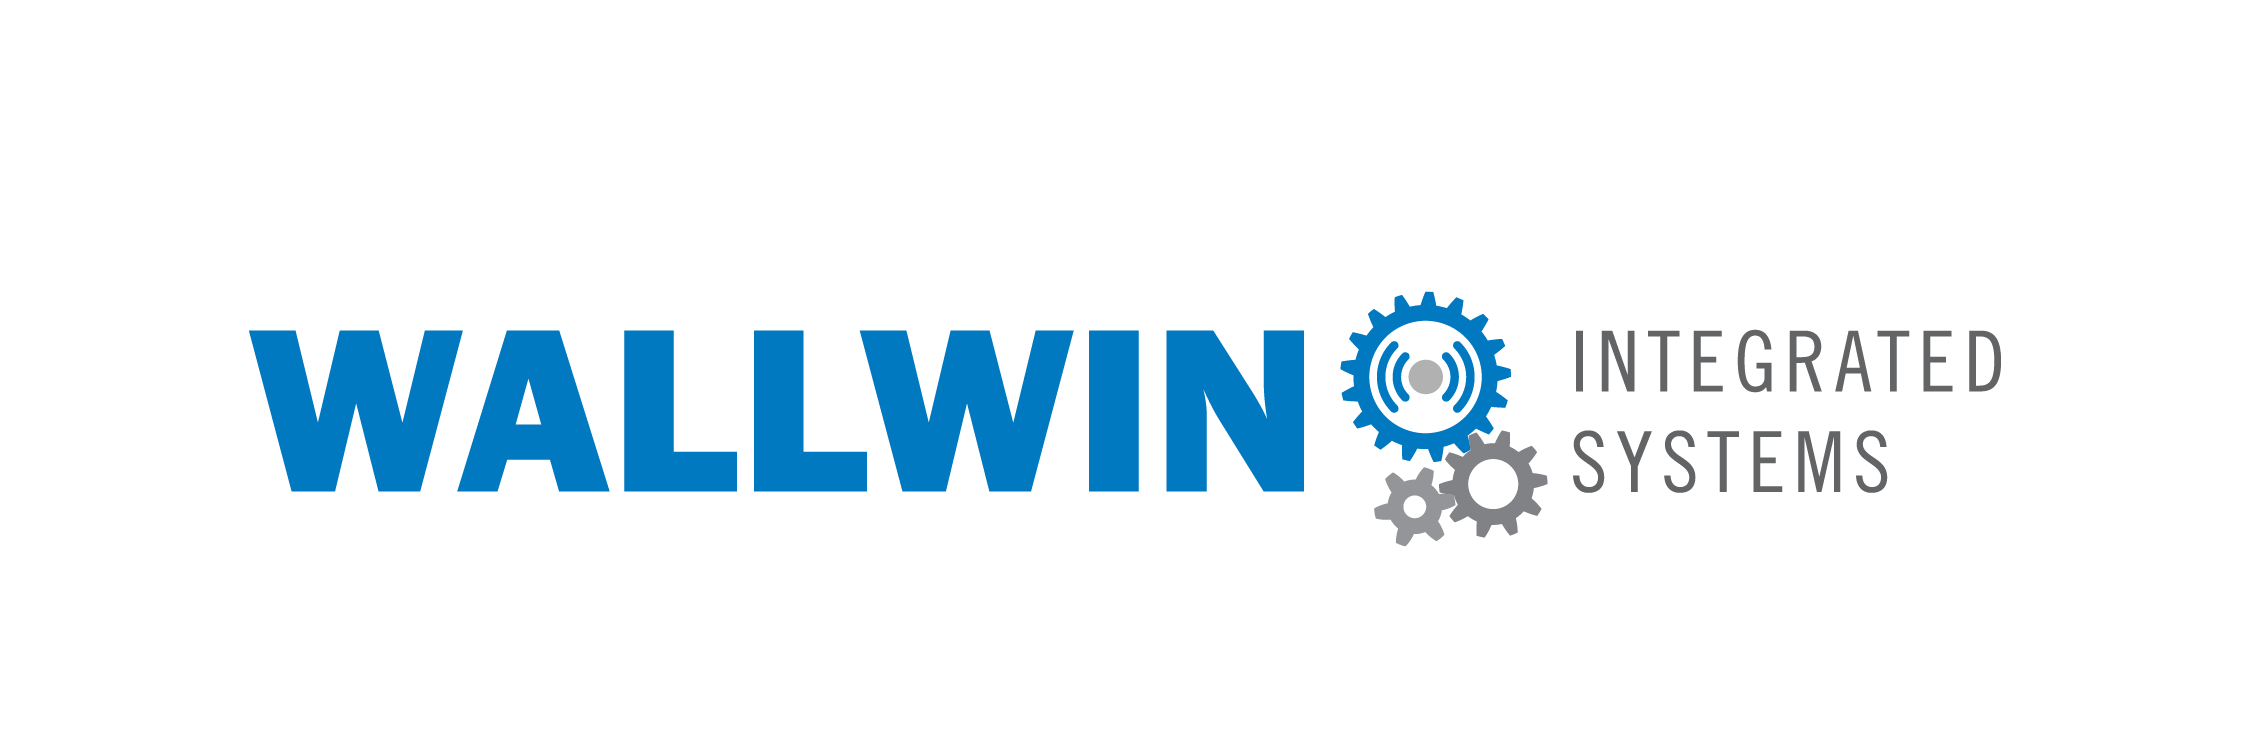 Wallwin Integrated Systems (logo)